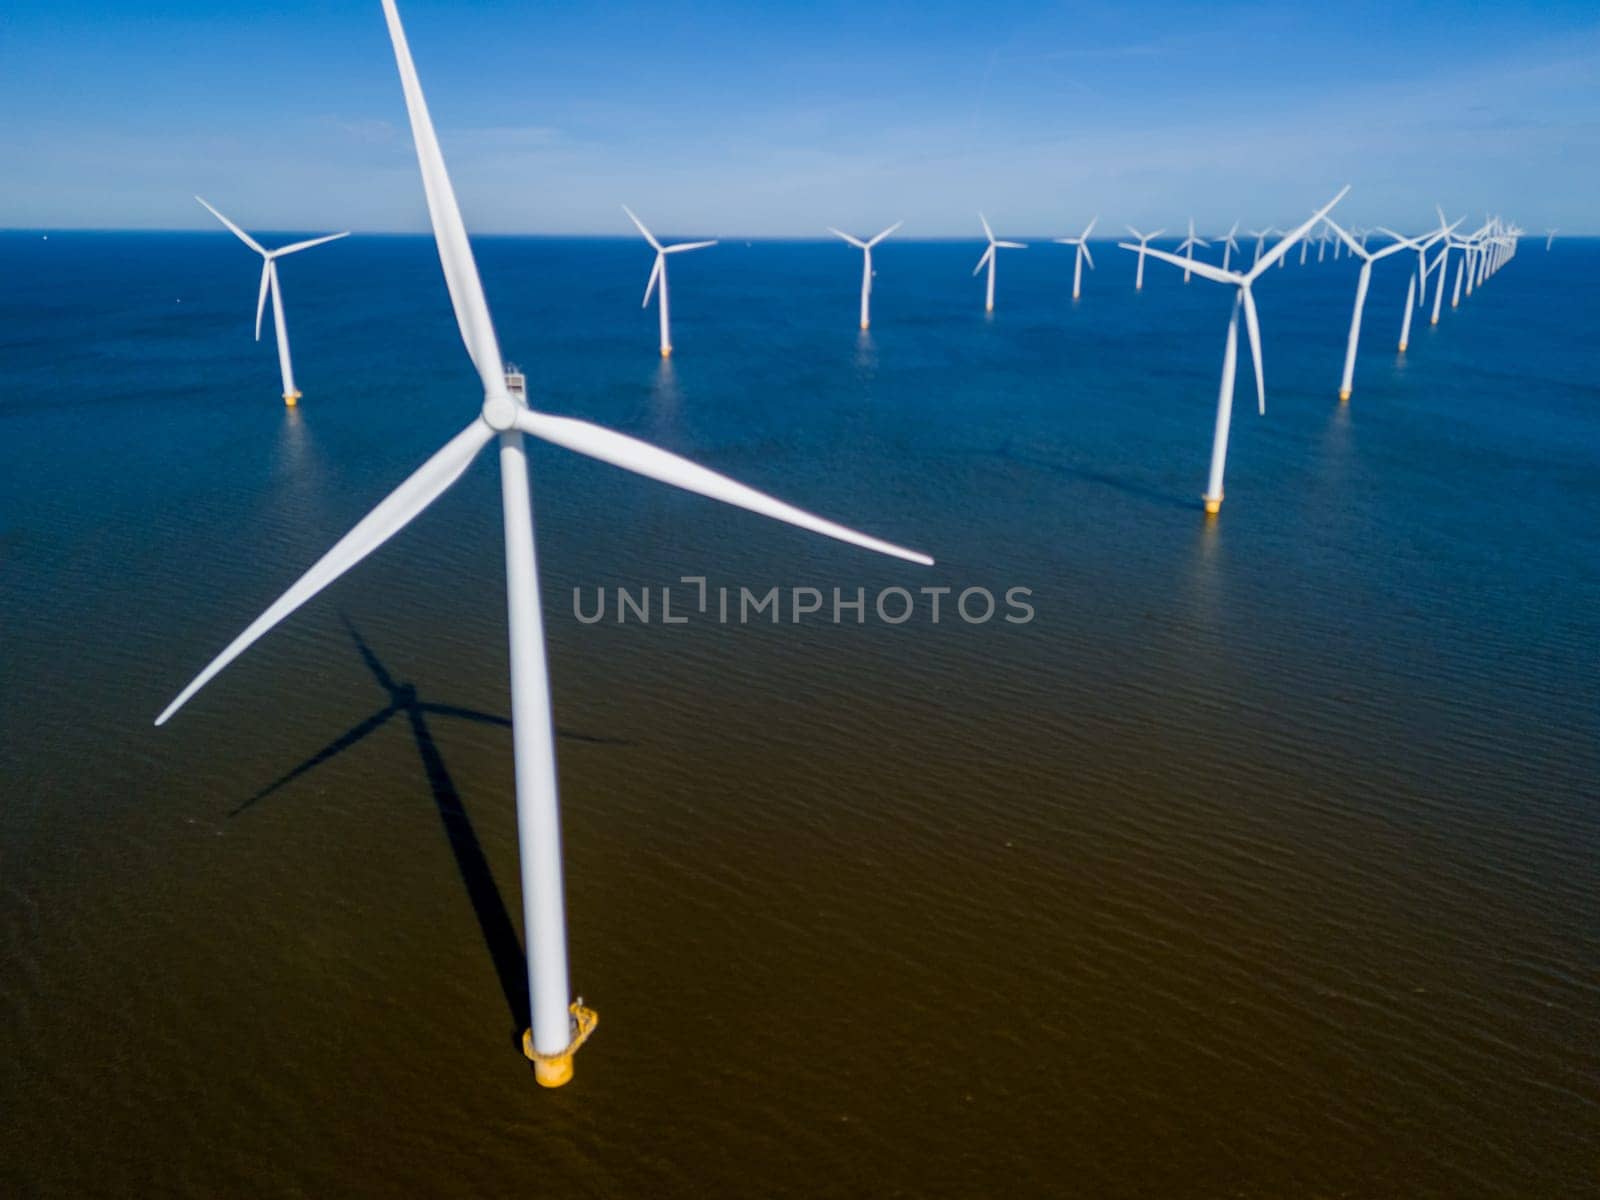 A group of majestic wind turbines standing tall in the ocean against a cloudy sky by fokkebok